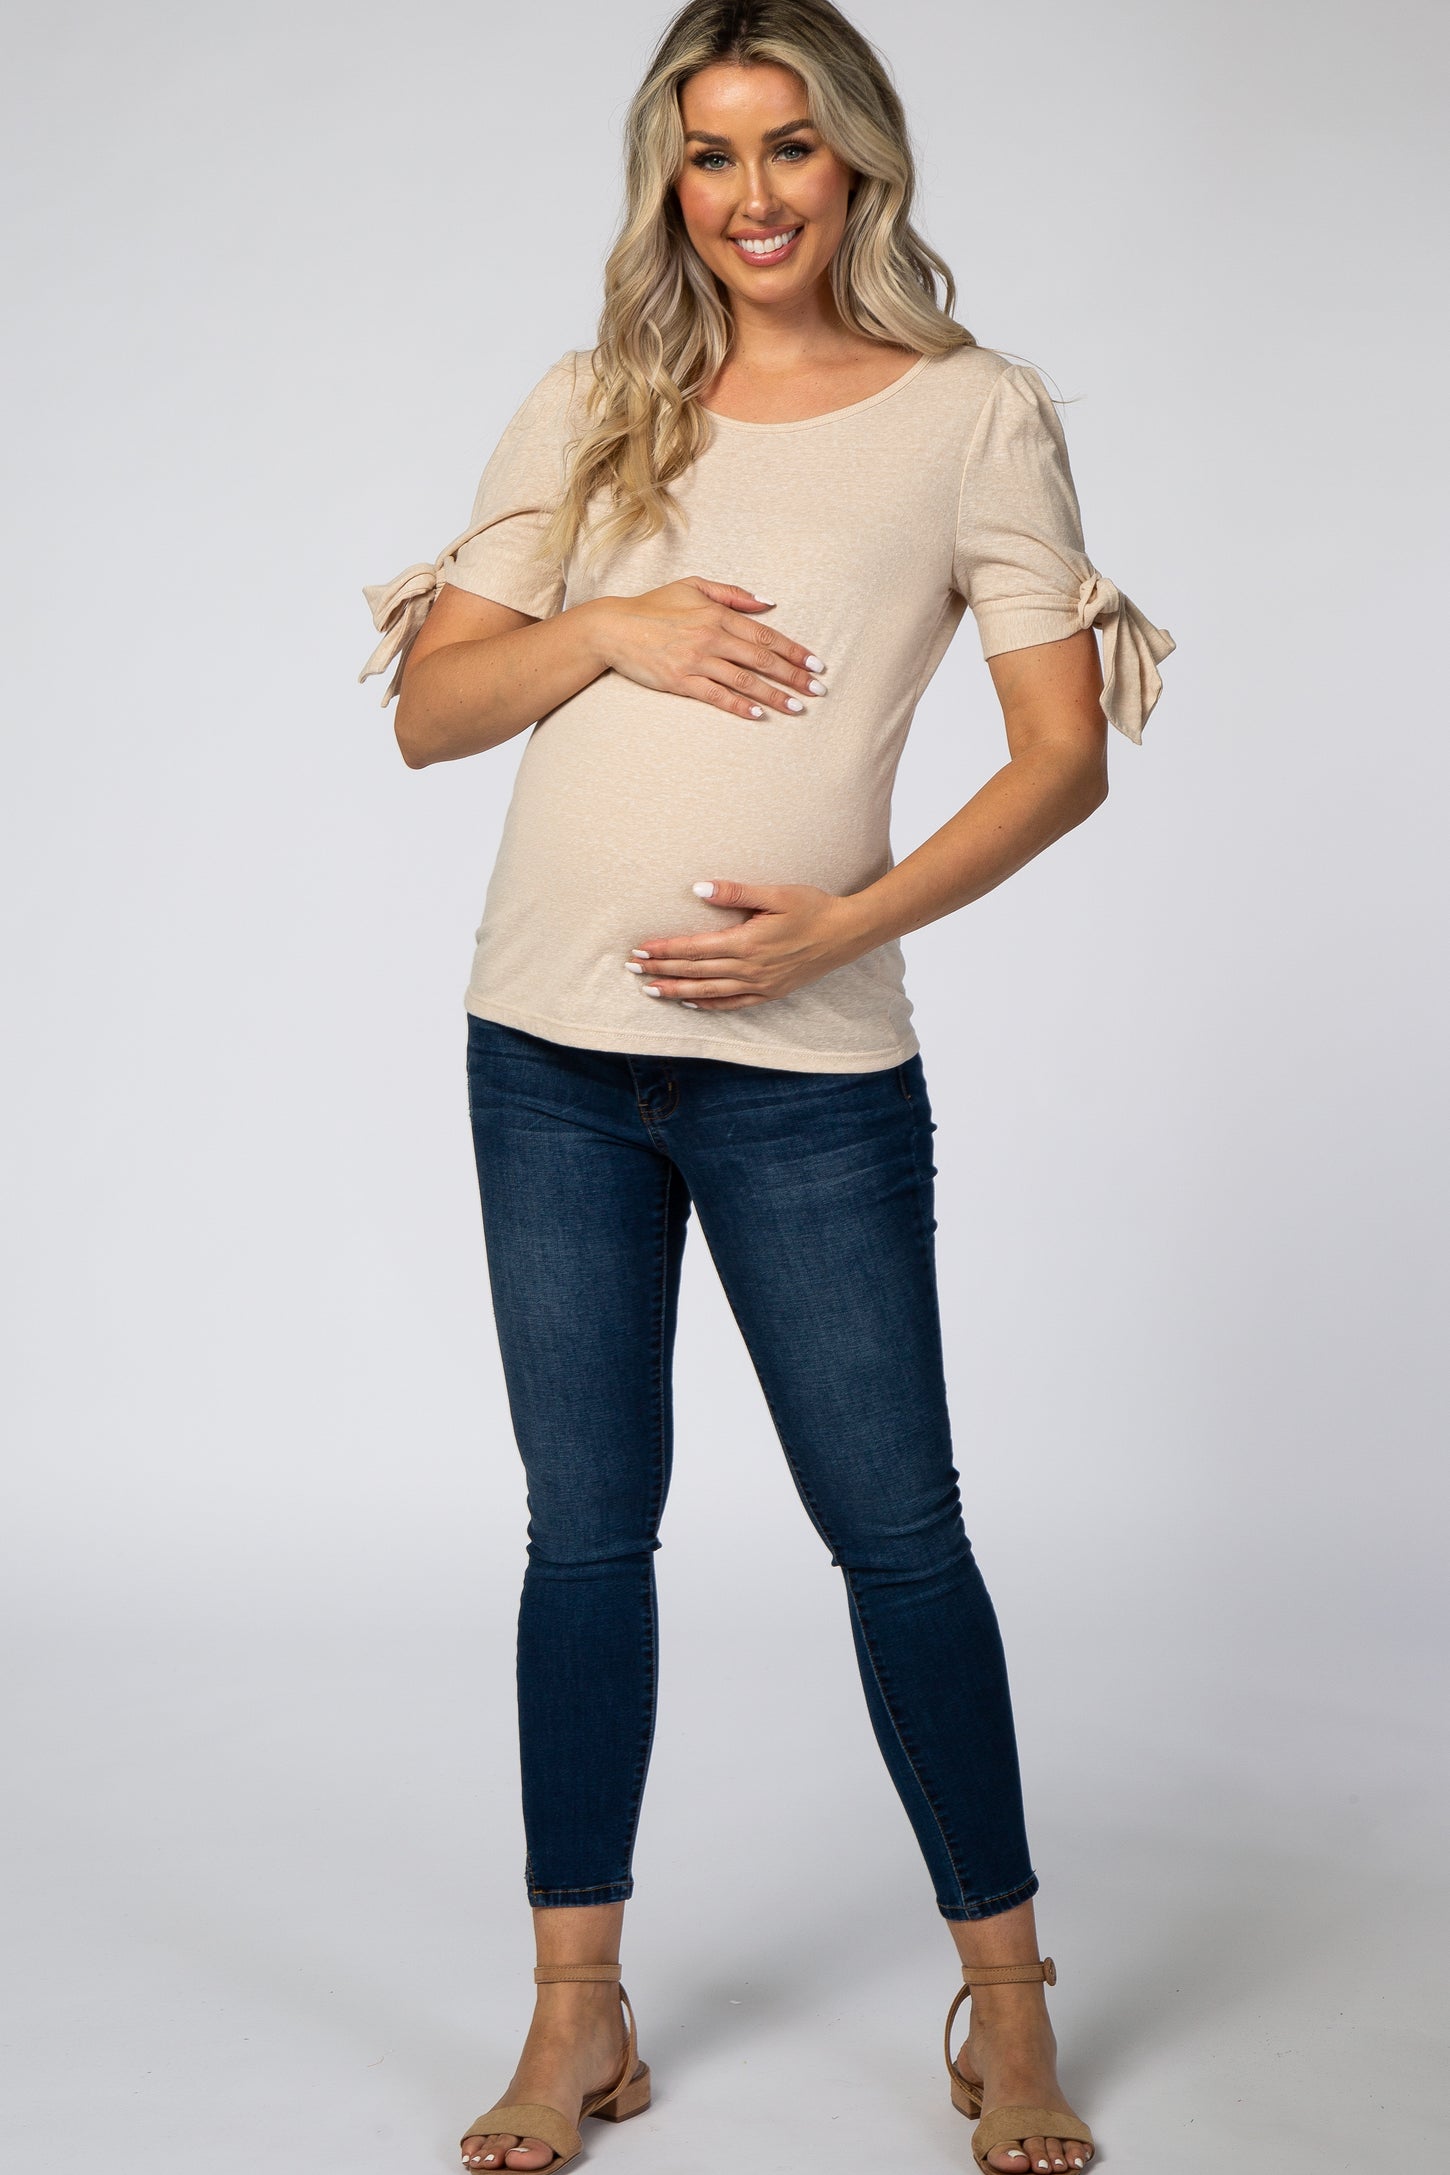 Taupe Short Tie Sleeve Maternity Top